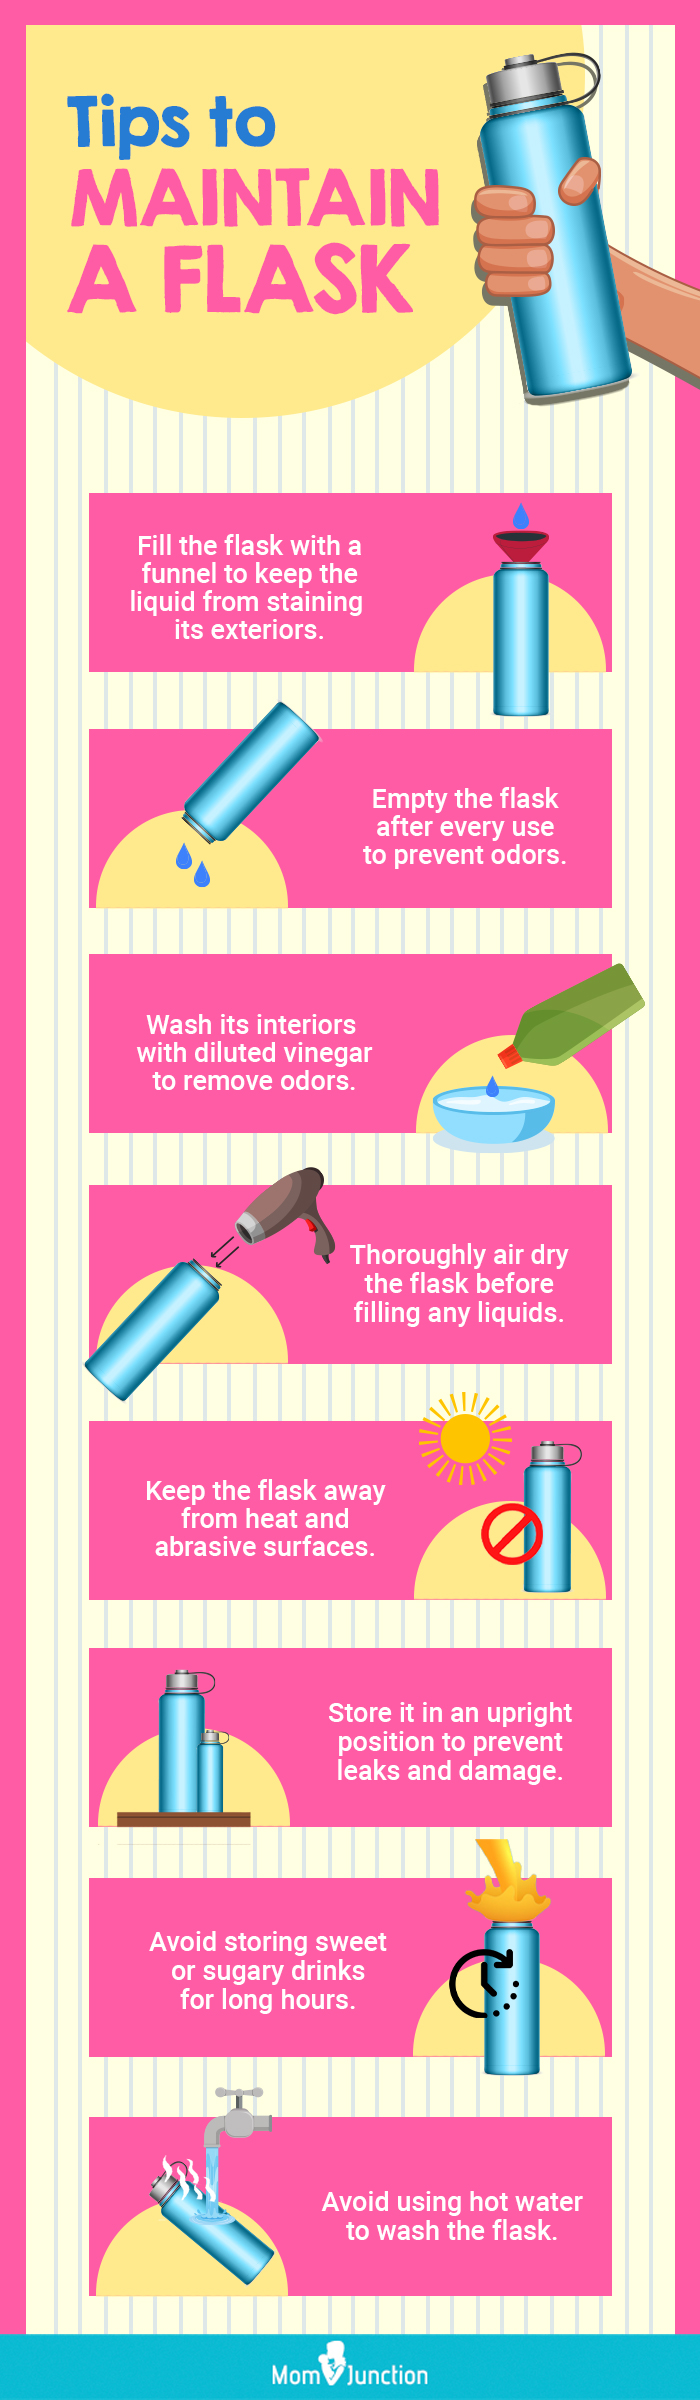 Tips To Maintain A Flask (infographic)